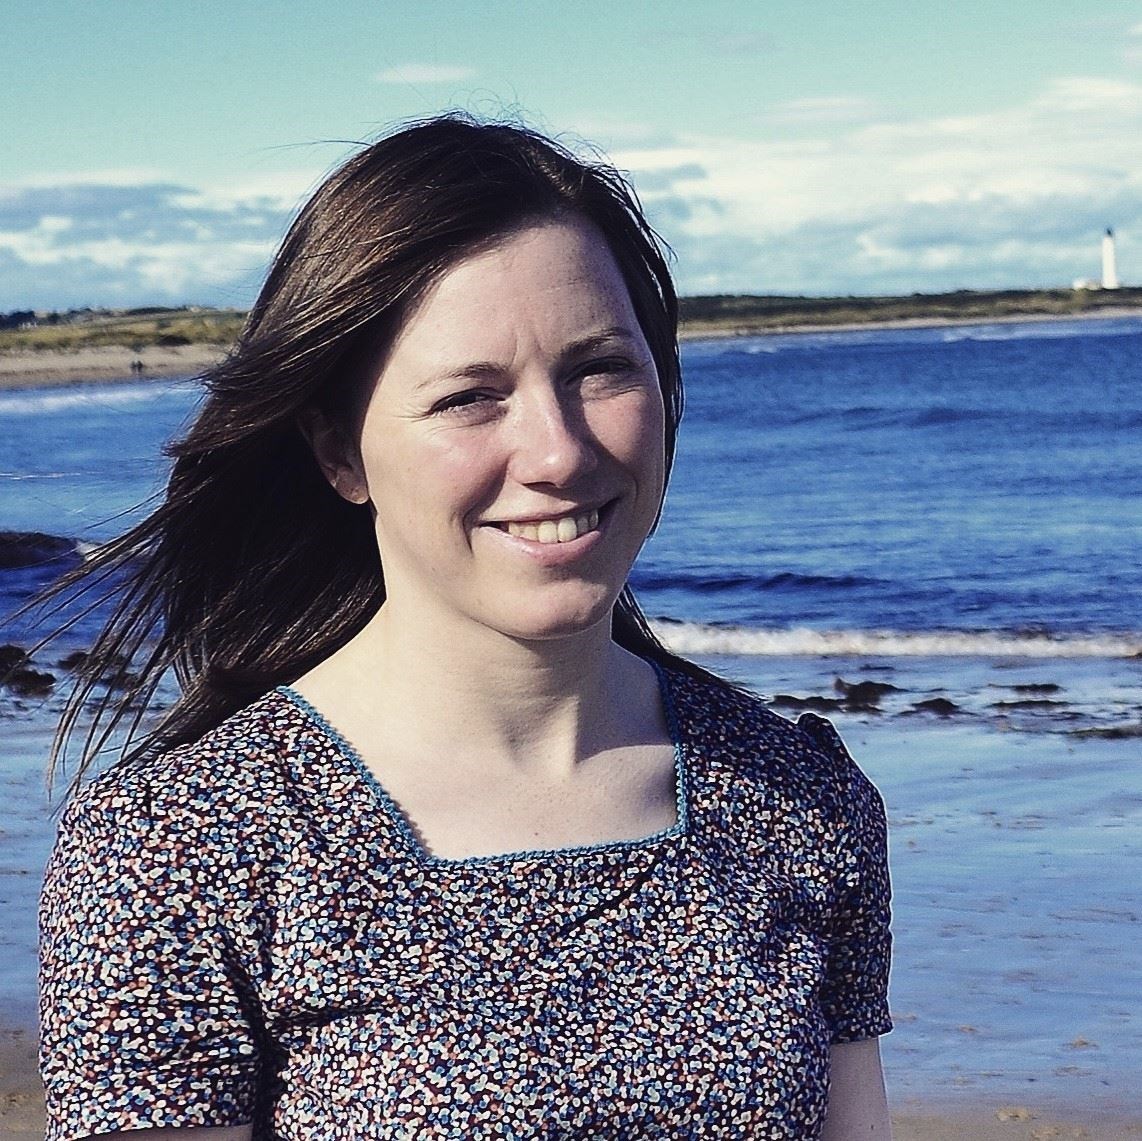 SNP general election candidate Laura Mitchell